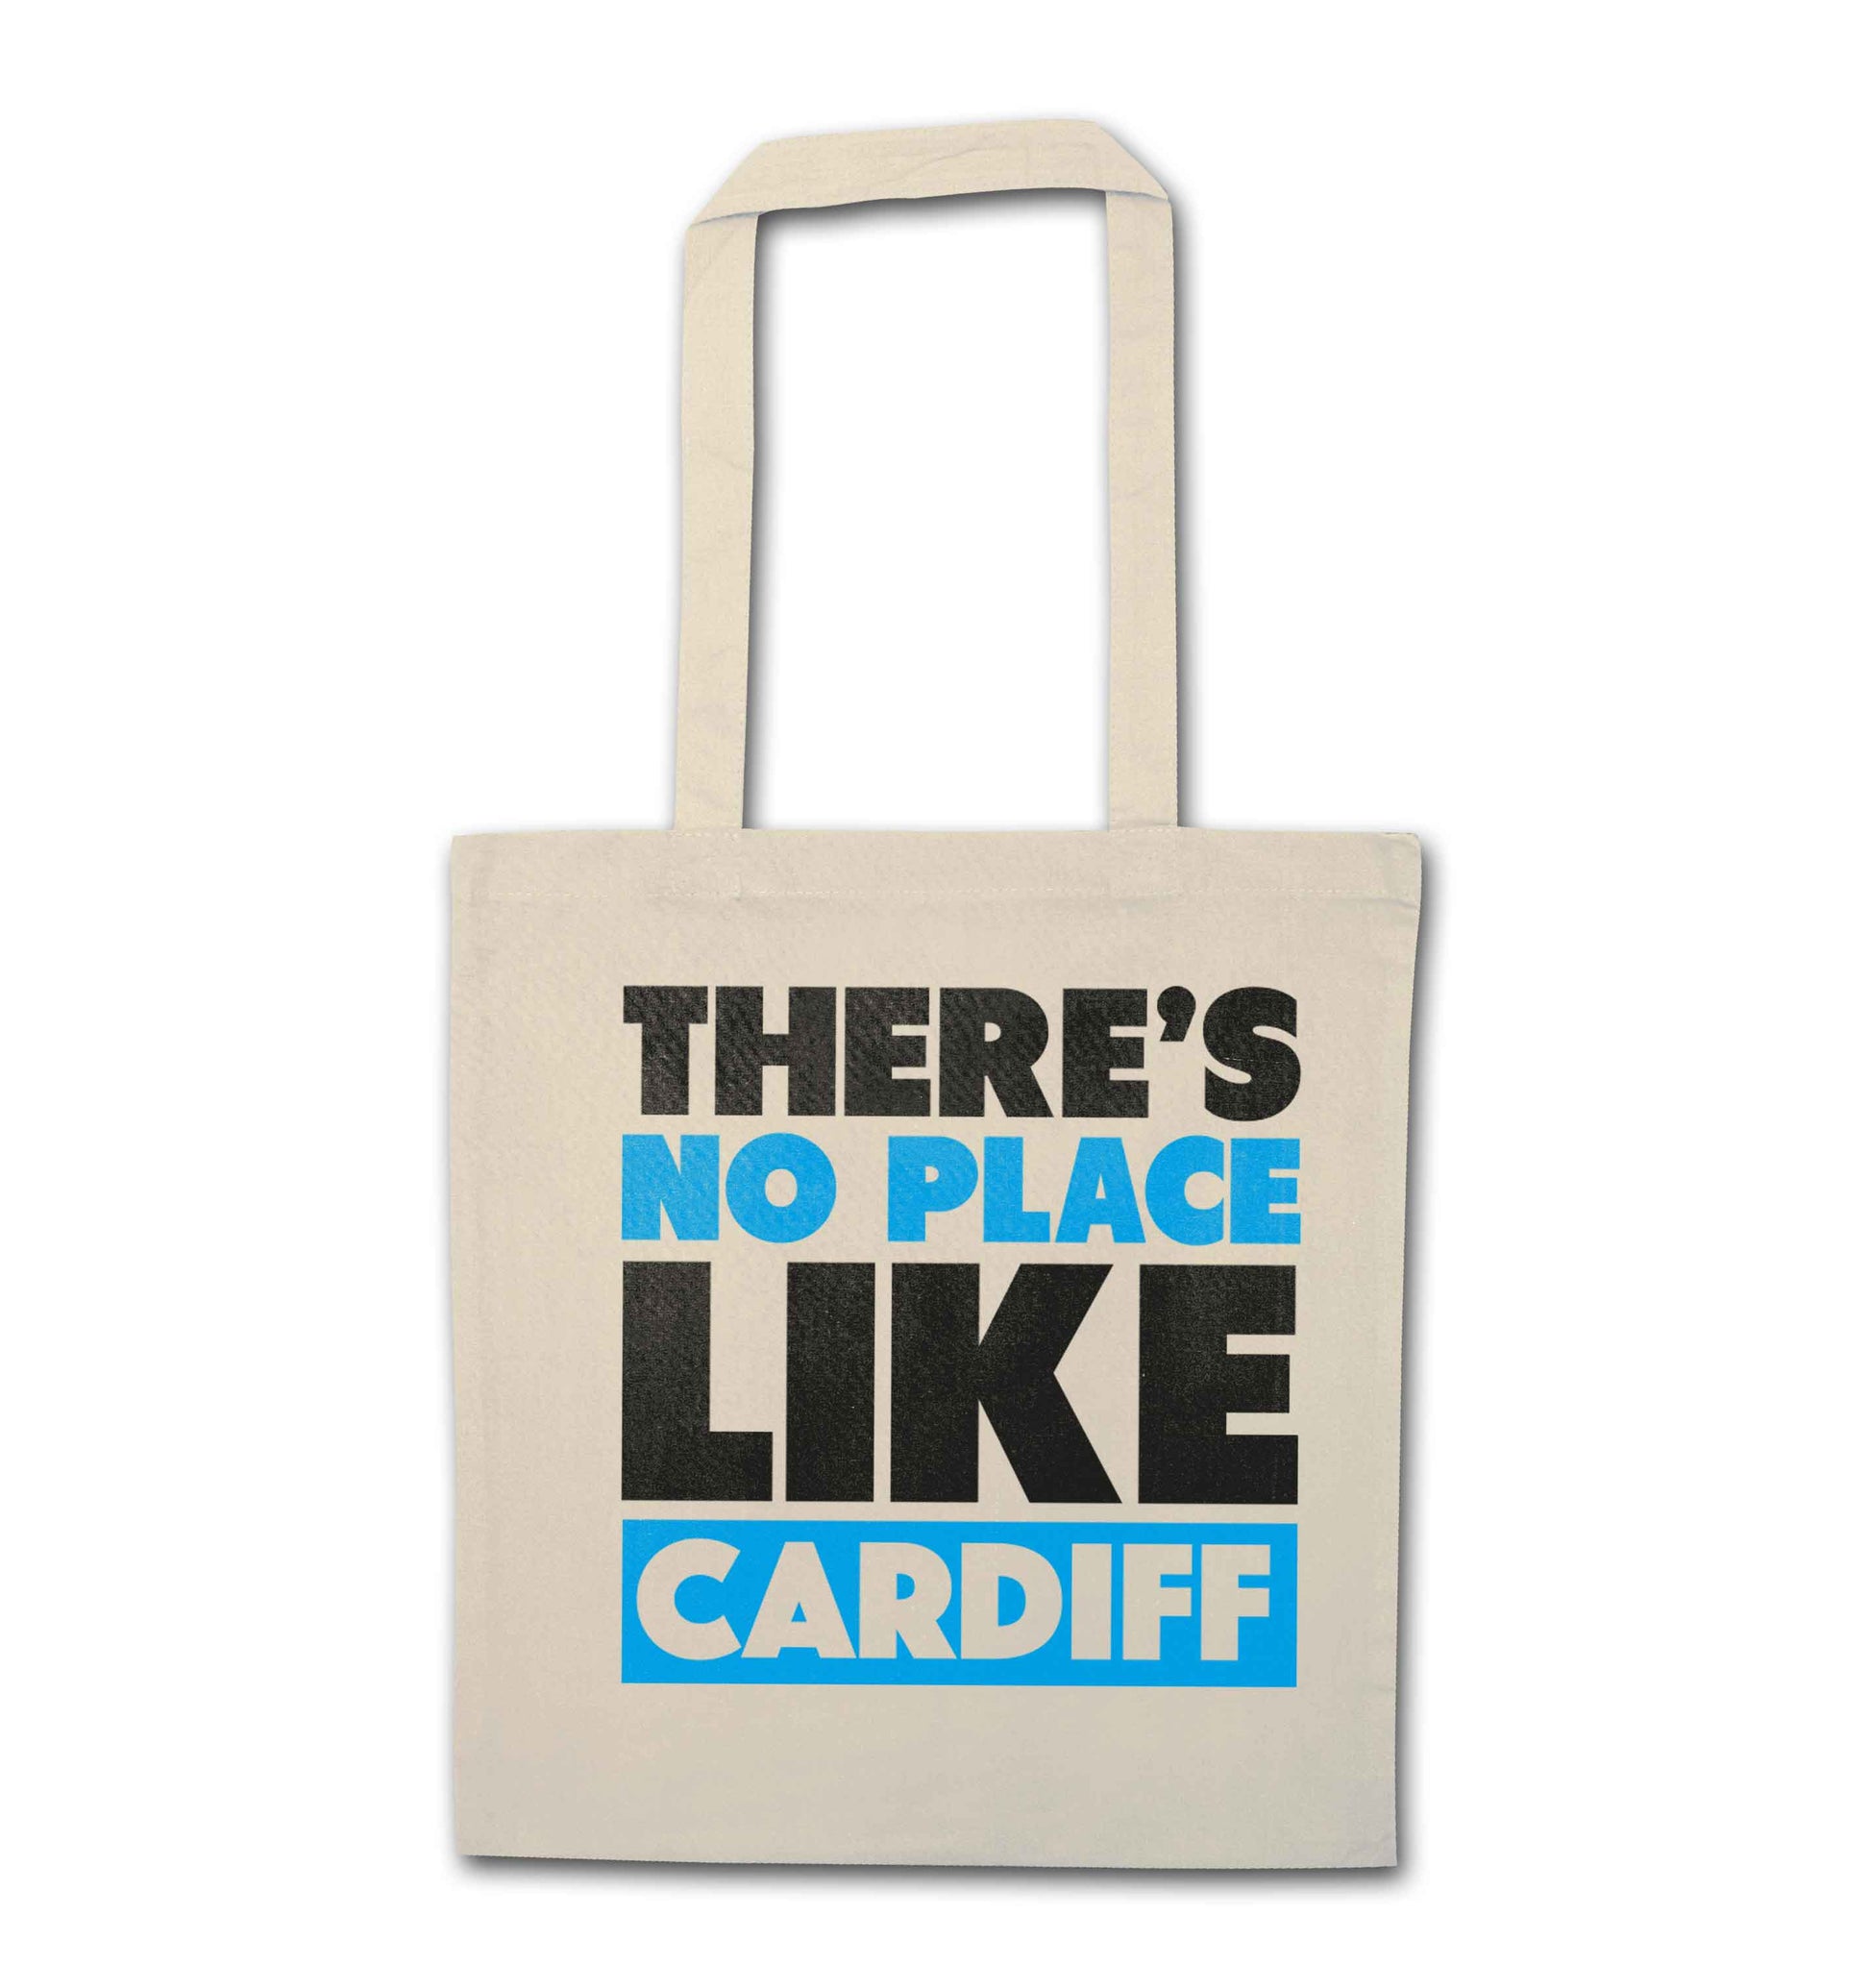 There's no place like Cardiff natural tote bag